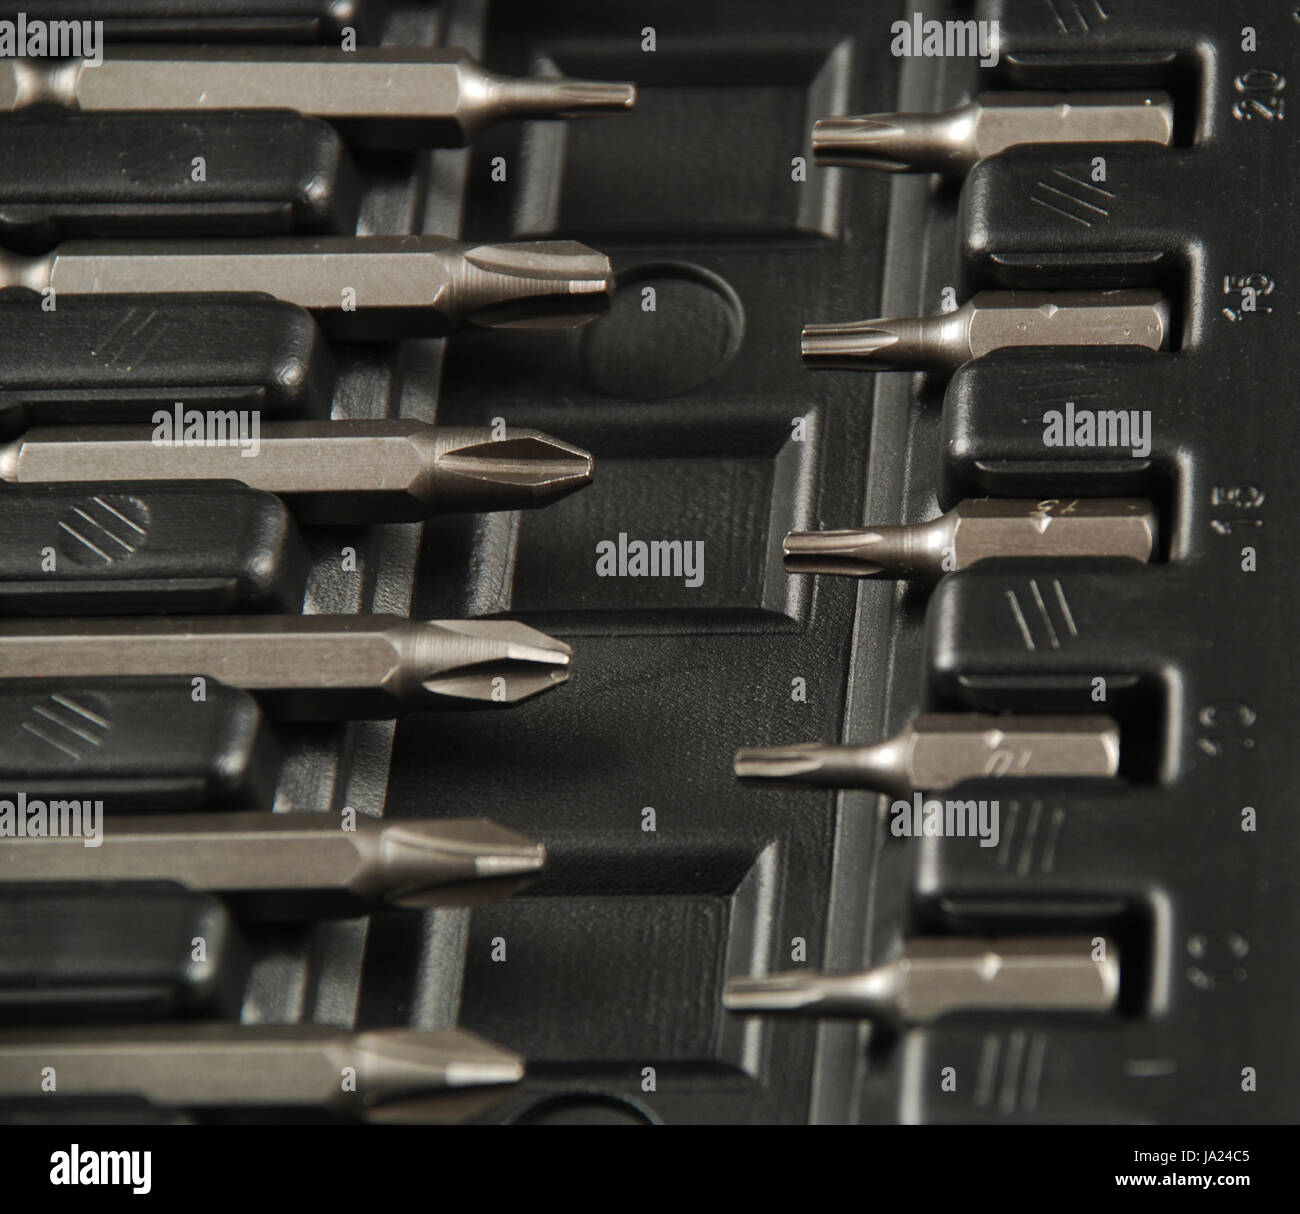 hole, drill, bits, bore, perforation, drilling, tools, industry, industrial, Stock Photo